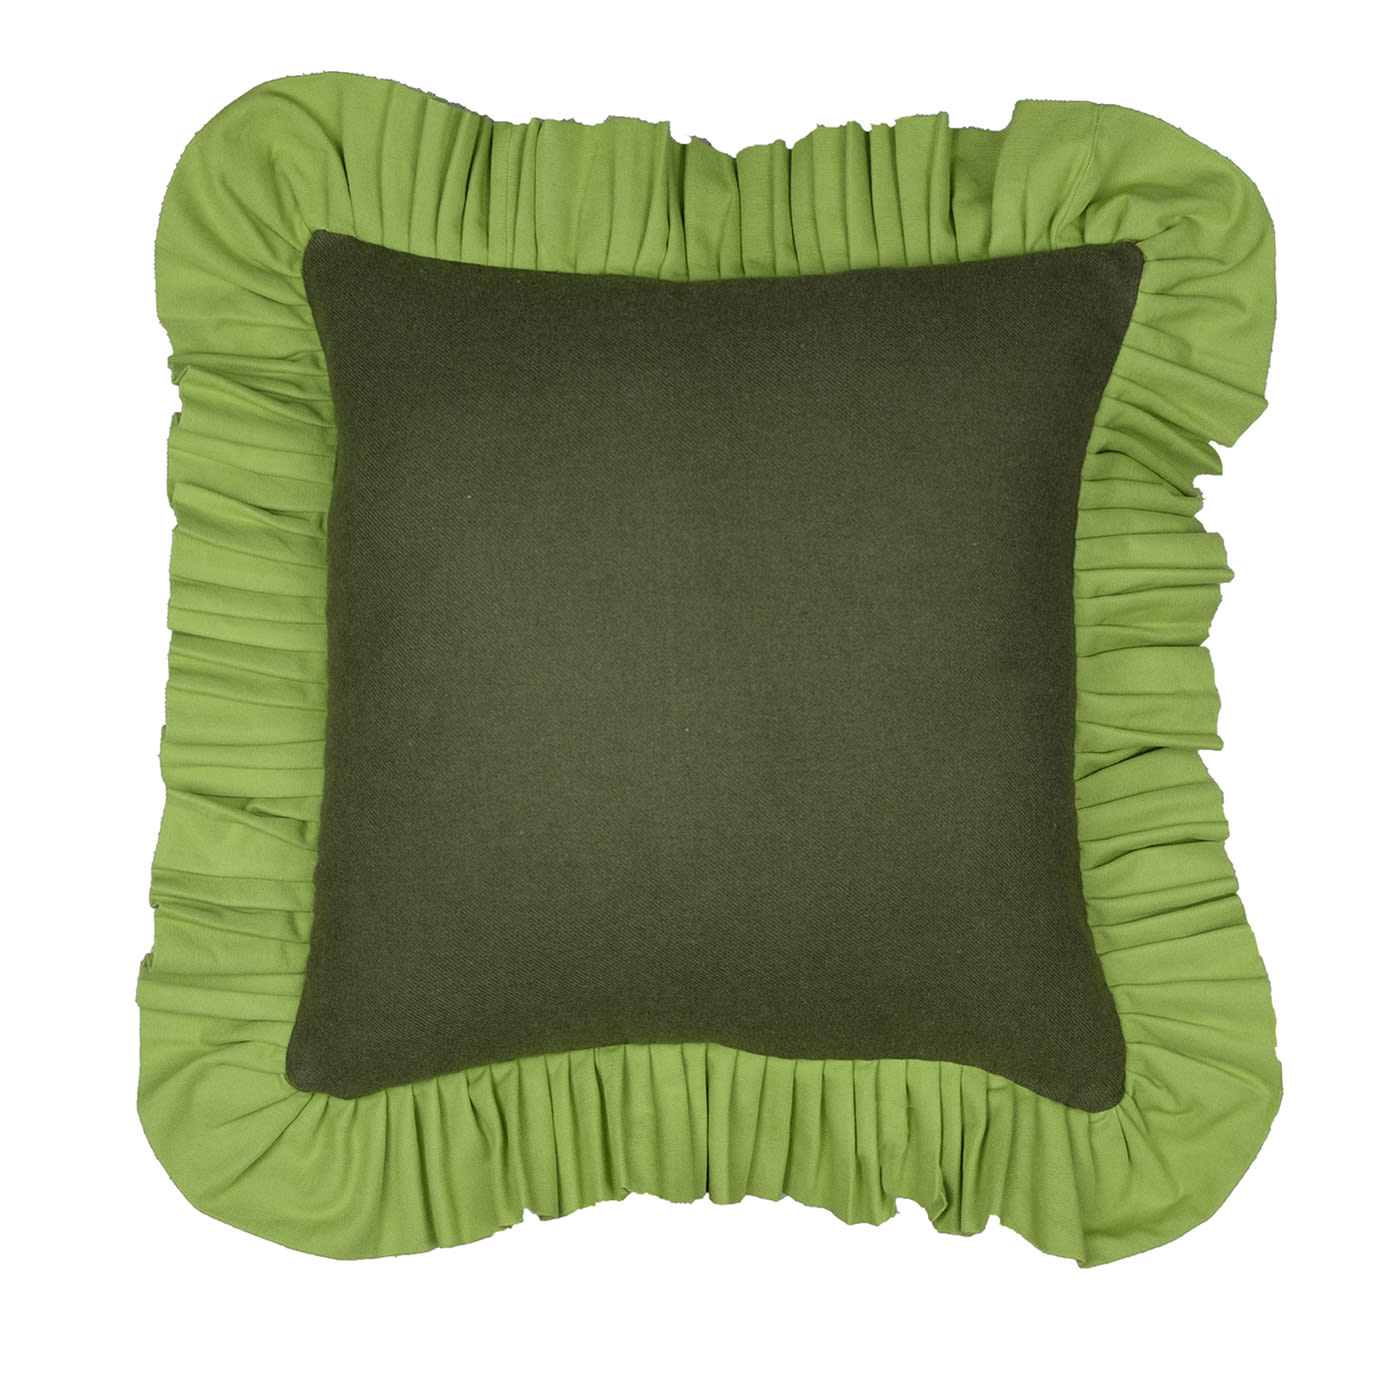 Deep-Green Cushion Cover with Pea-Green Ruffle - In Casa by Paboy